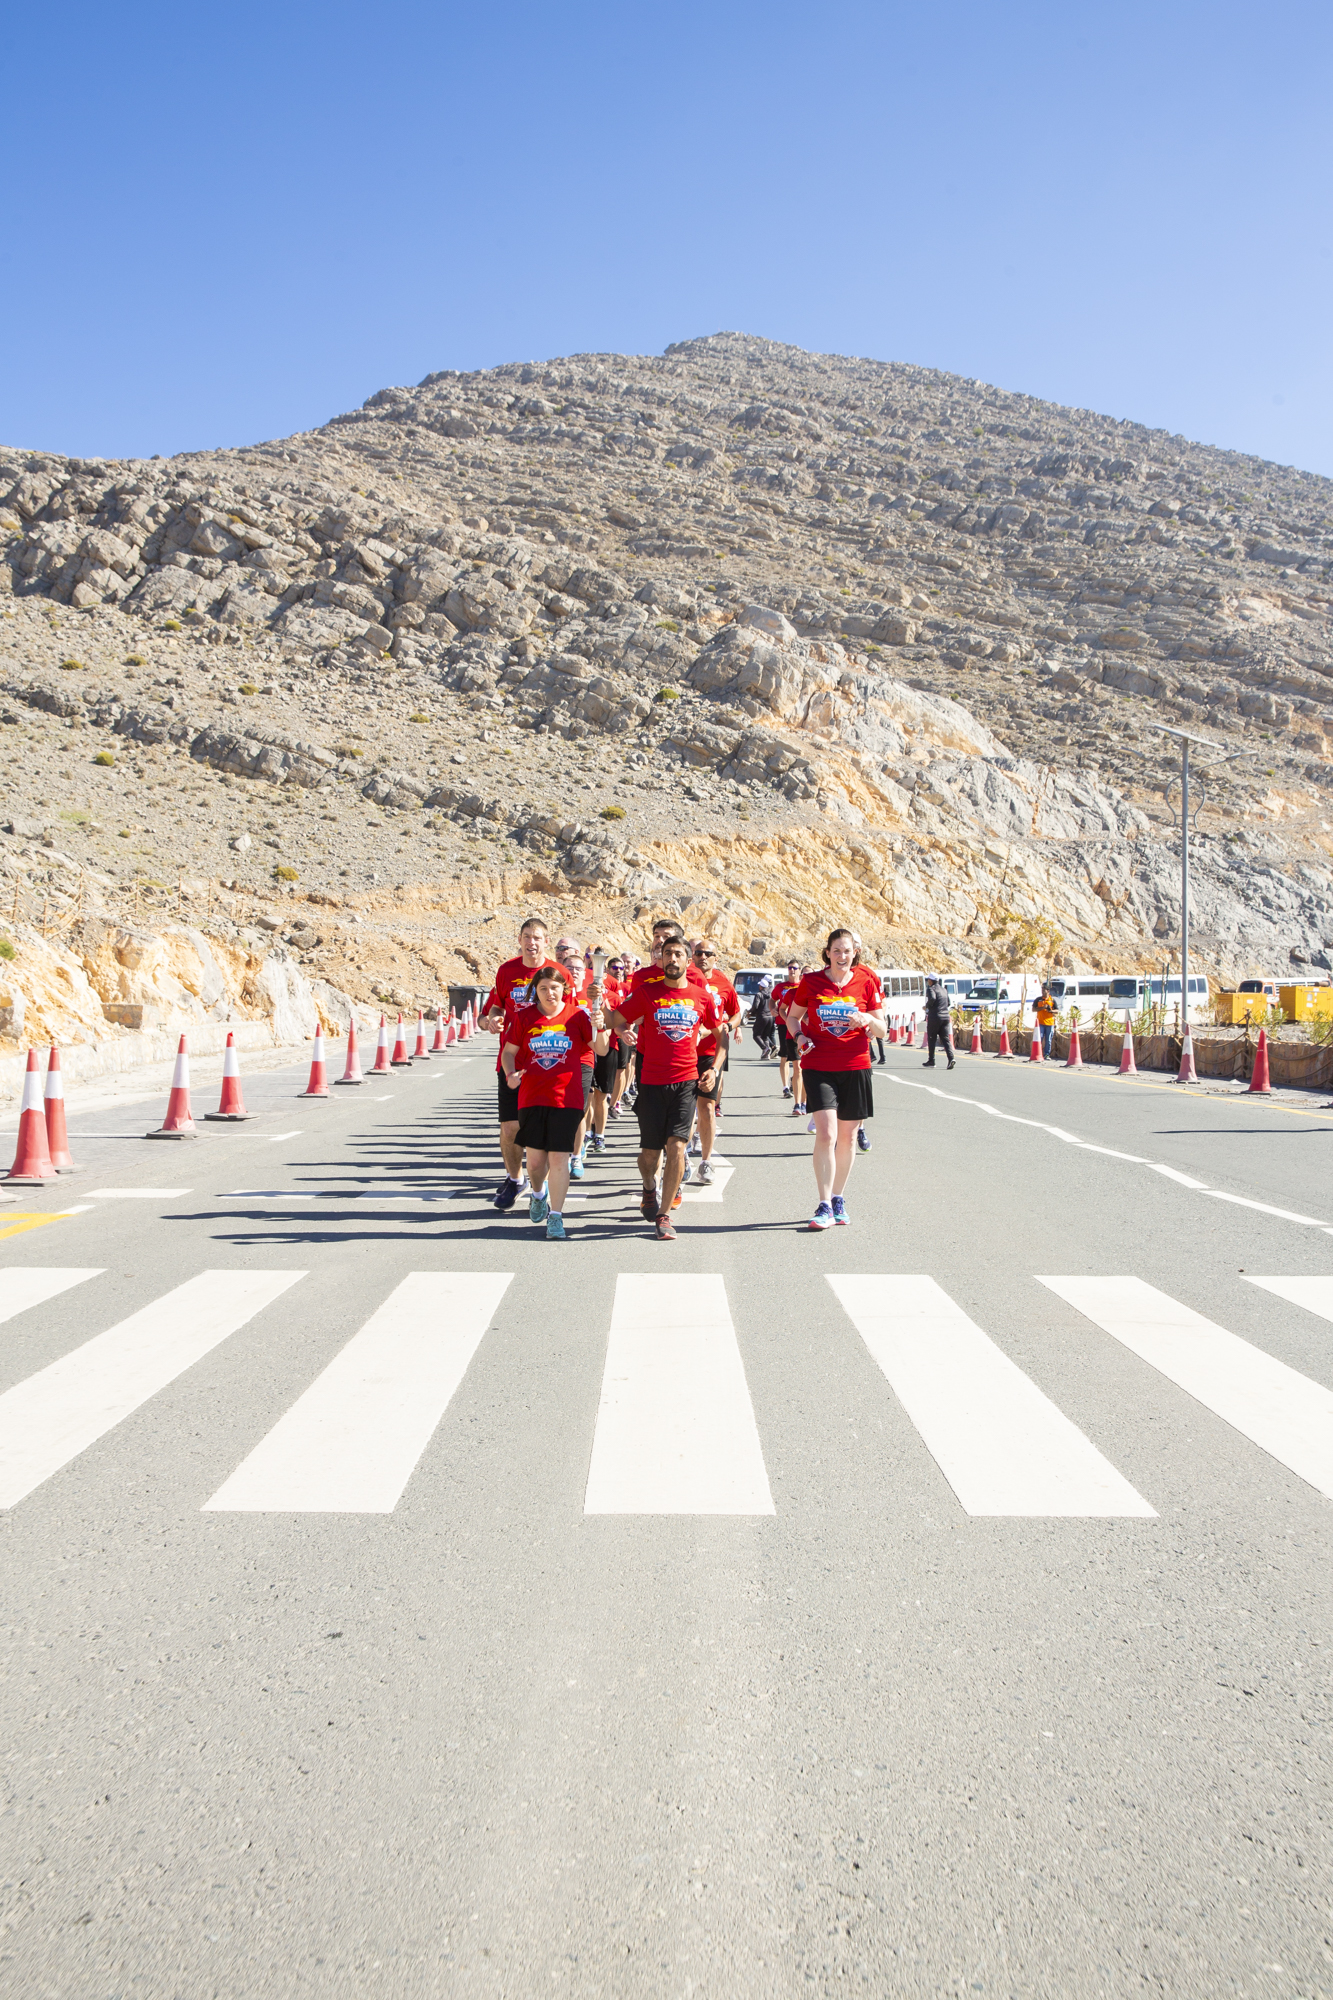 Special Olympics Flame Of Hope Lights Up The Highest Mountain In The UAE On Day Two Of The Torch Run